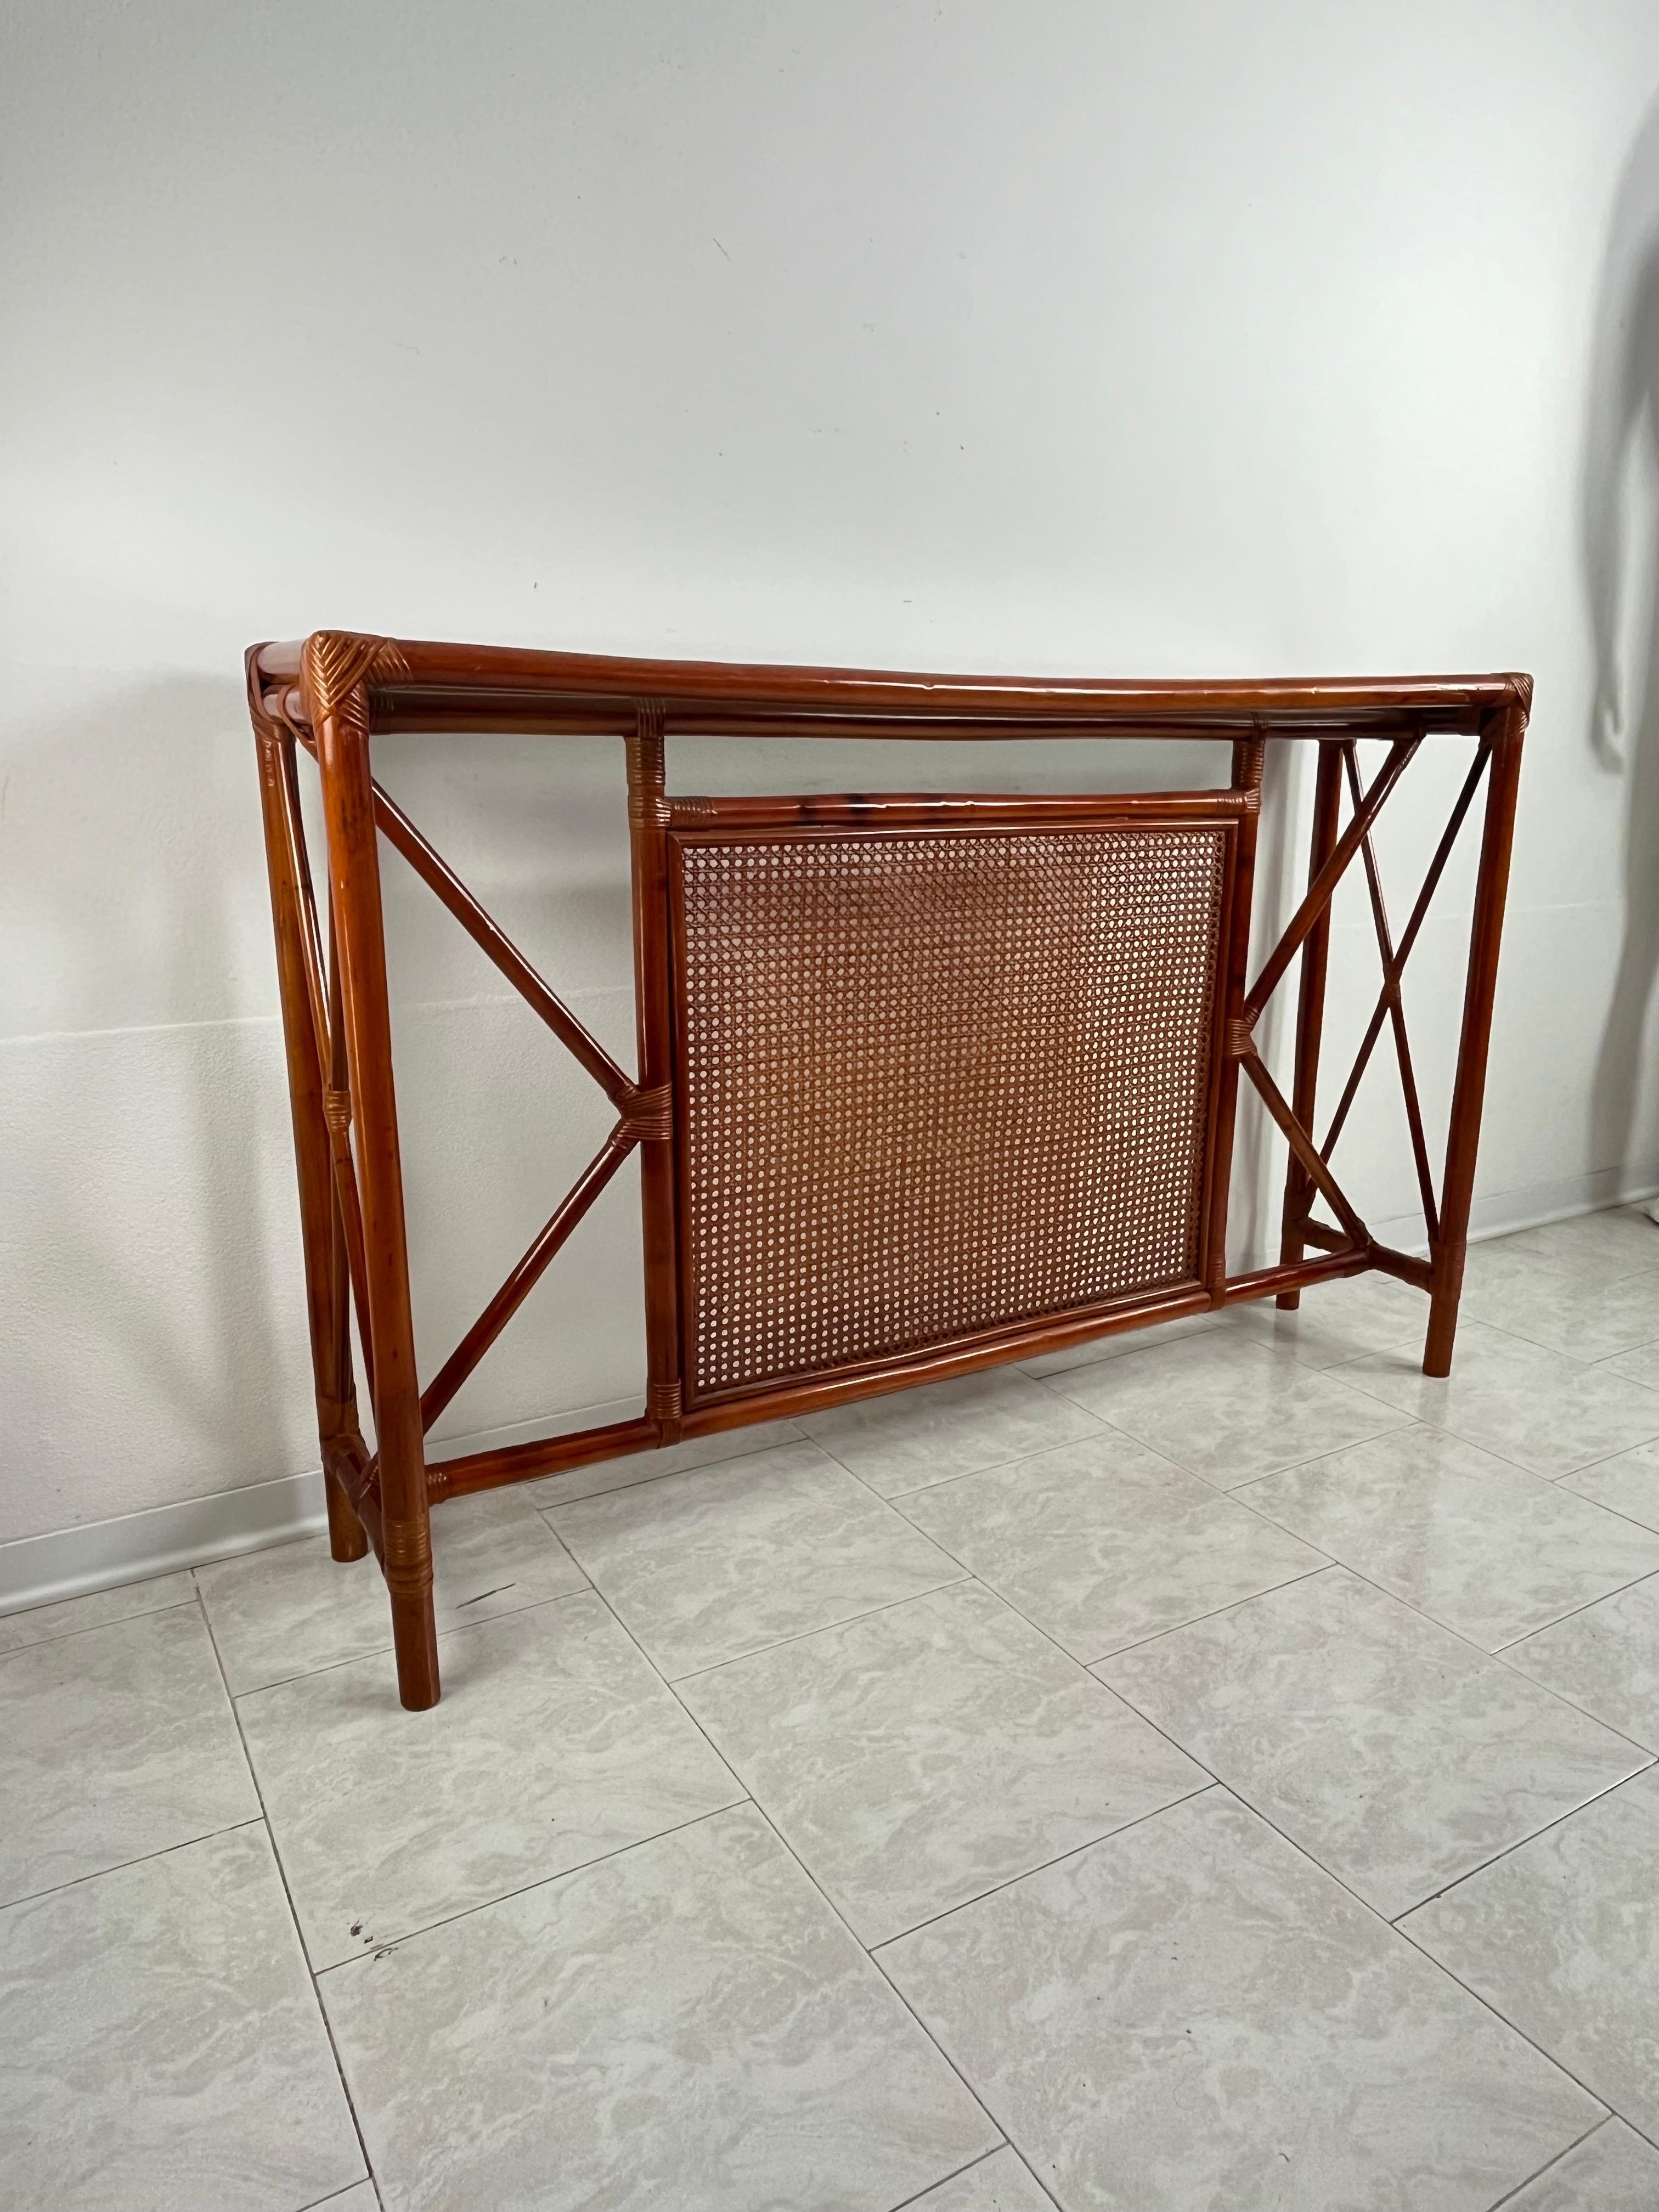 Set of 2 Bamboo and Rattan Console and Mirror Attributed to Franco Albini 1960s For Sale 5